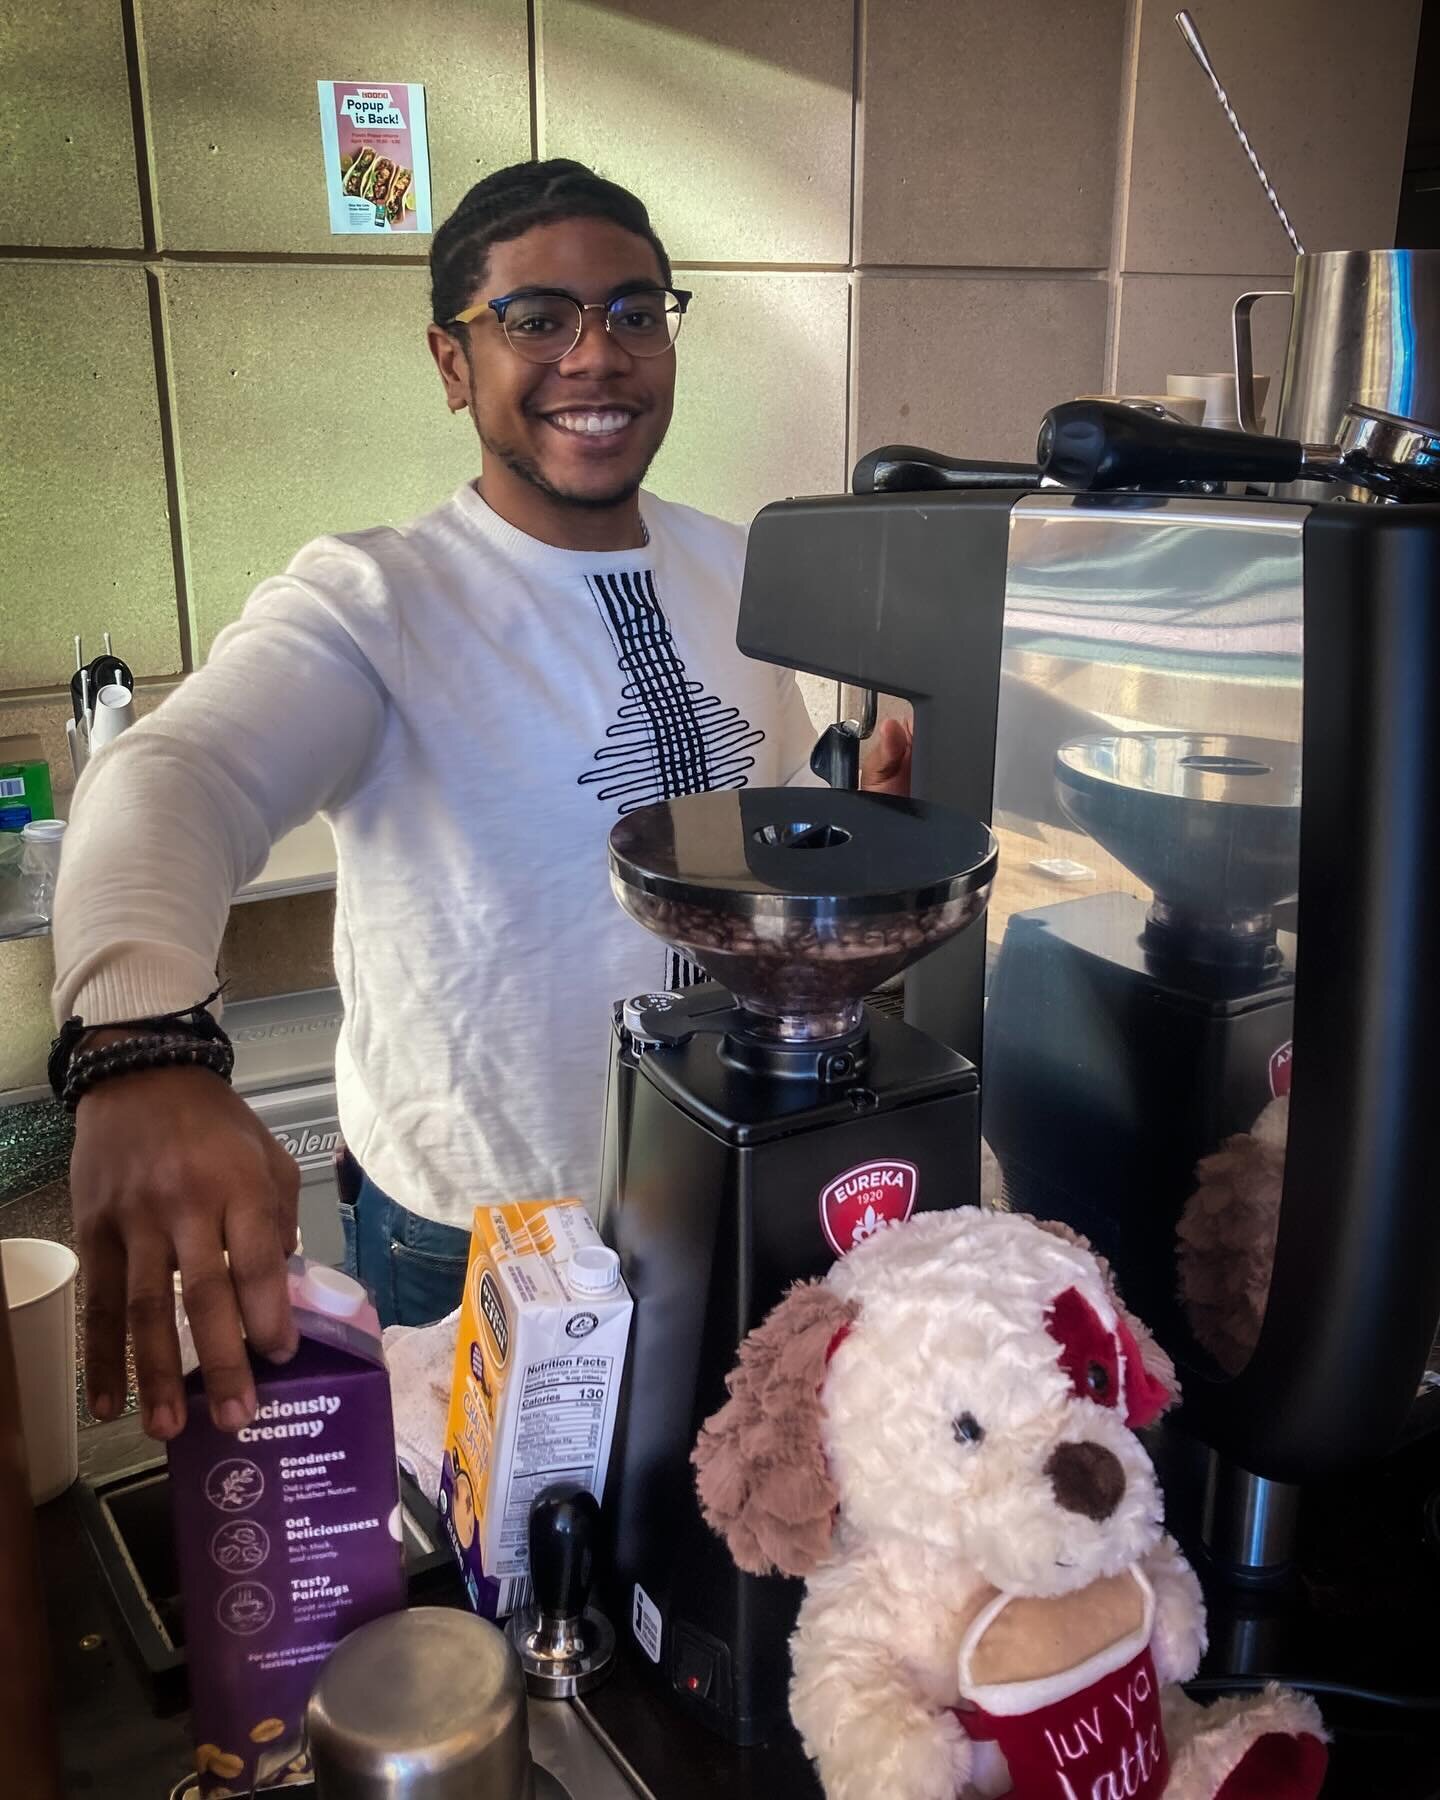 Look at that welcoming face! Tyjah kept busy this morning charming customers one by one with his contagious smile and laughter. ☺️